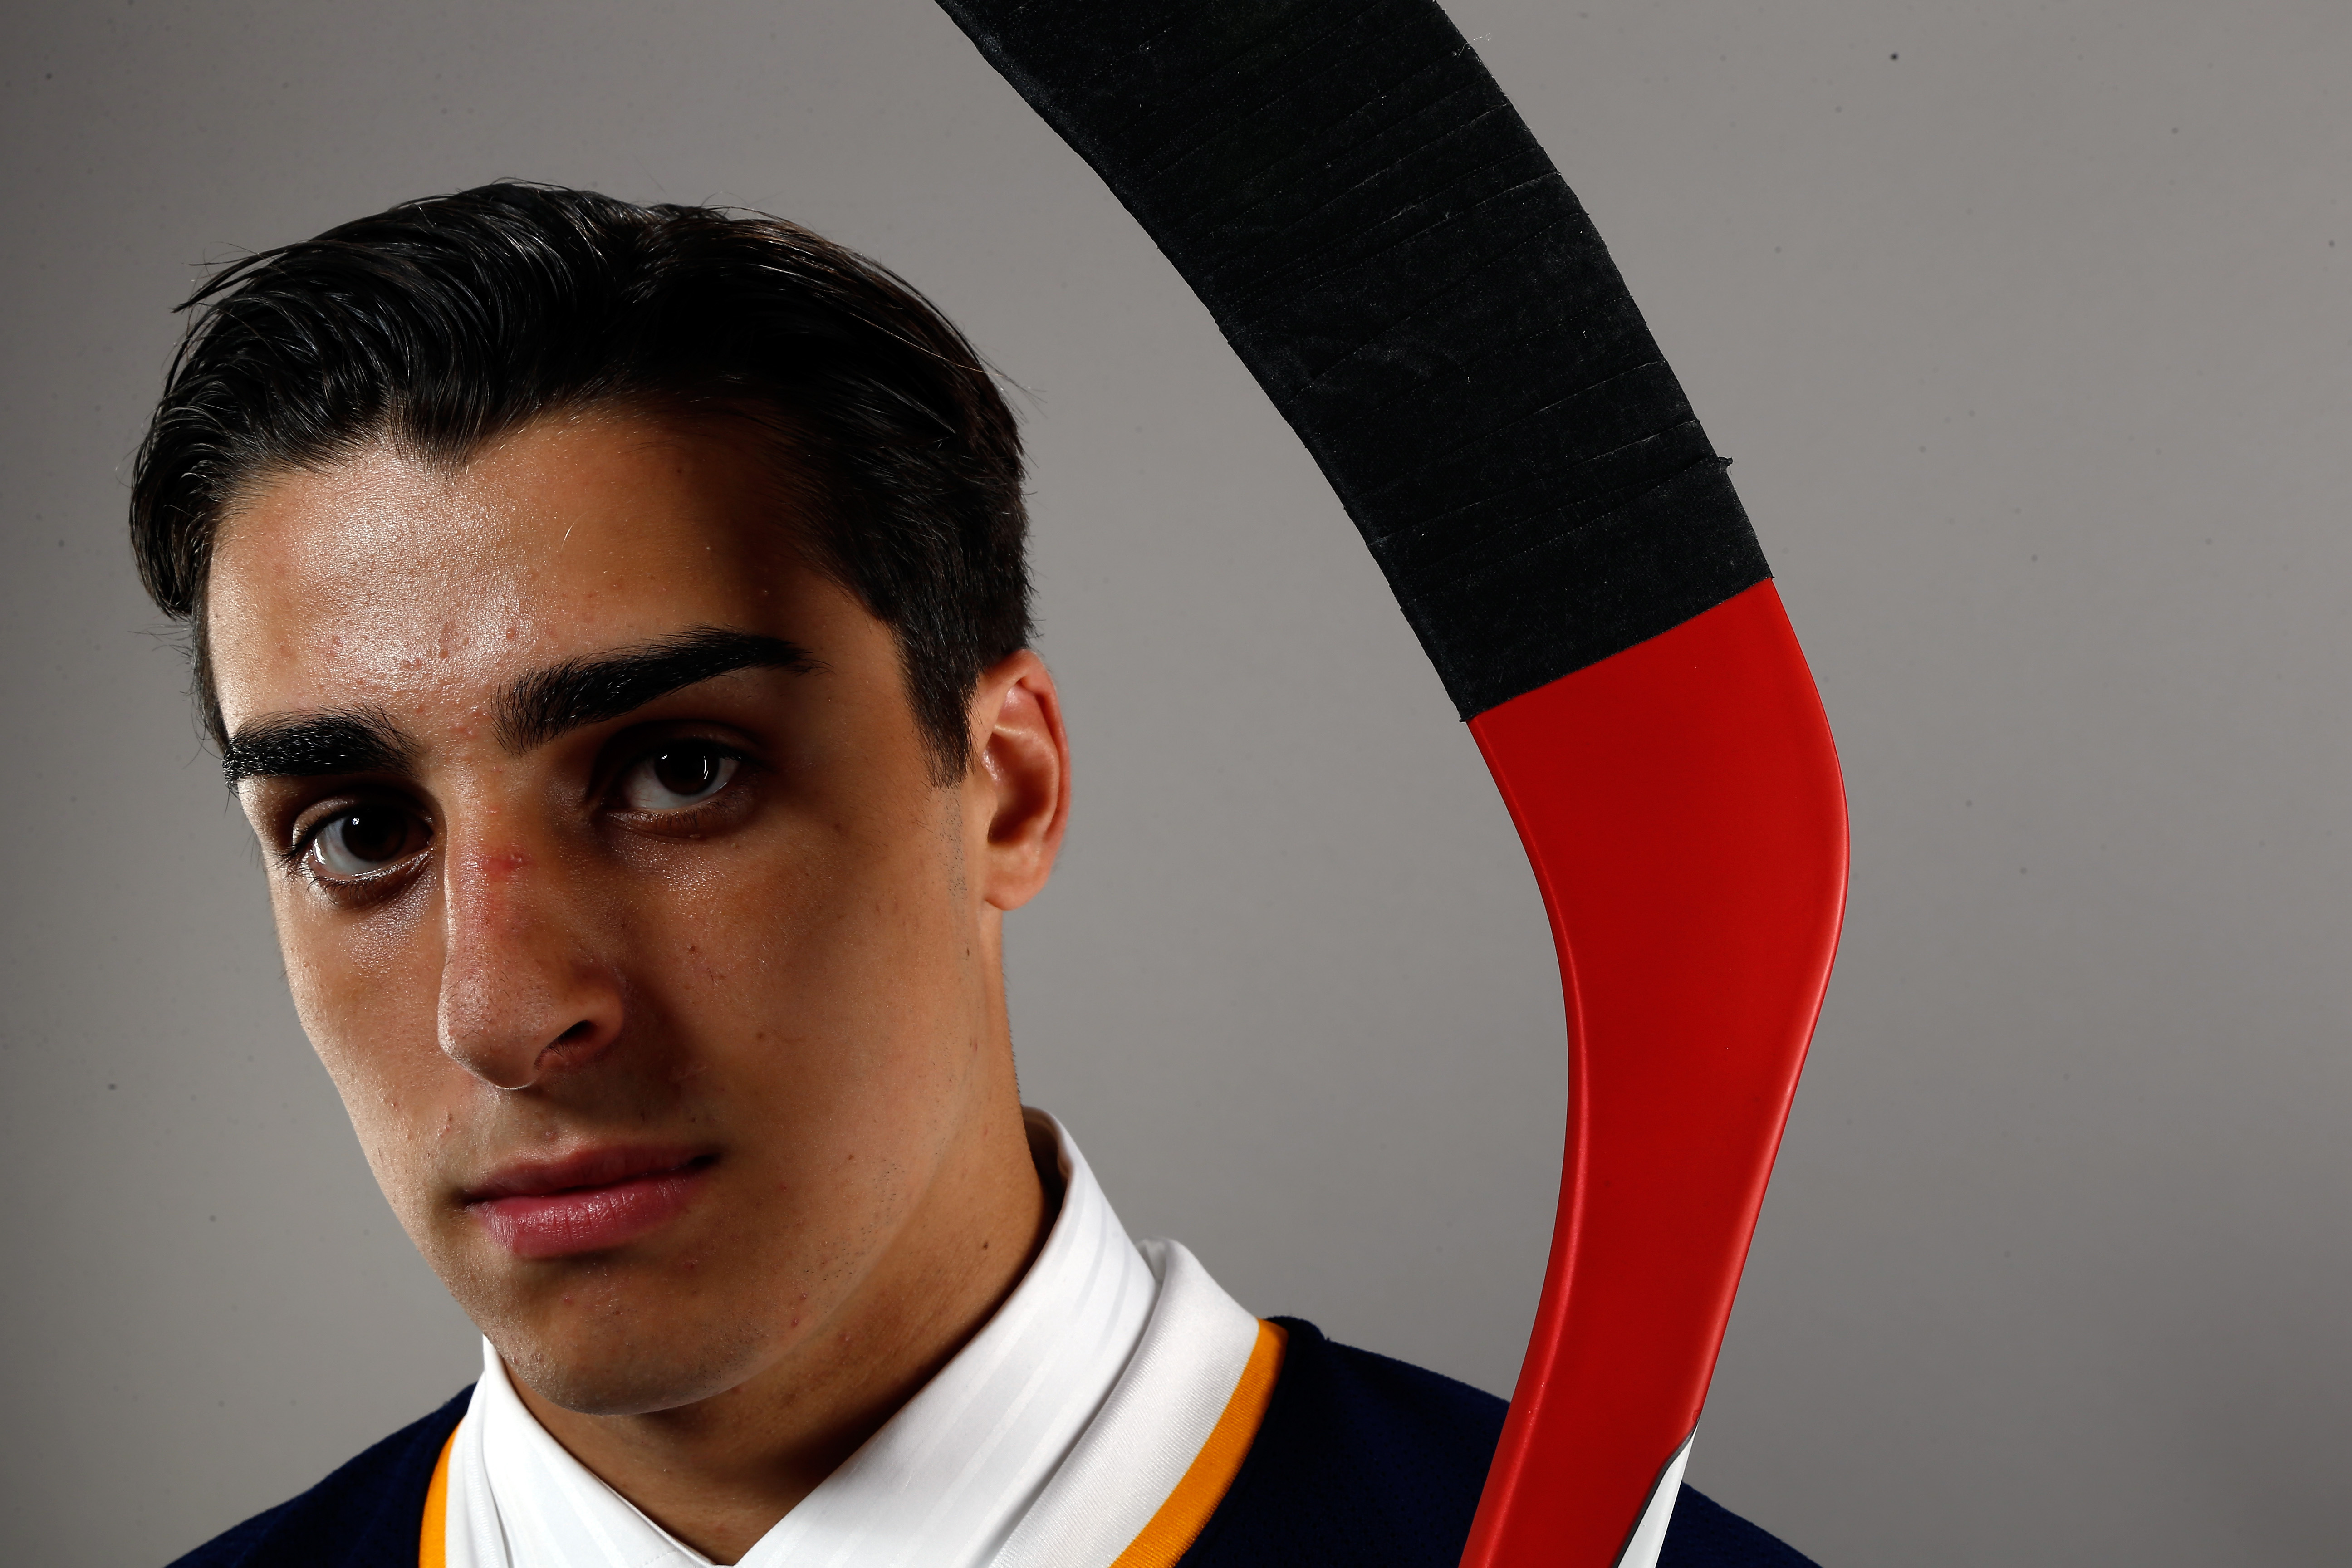 PHILADELPHIA, PA - JUNE 27:  Robert Fabbri of the St. Louis Blues poses for a portrait during the 2014 NHL Draft at the Wells Fargo Center on June 27, 2014 in Philadelphia, Pennsylvania.  (Photo by Jeff Zelevansky/Getty Images)